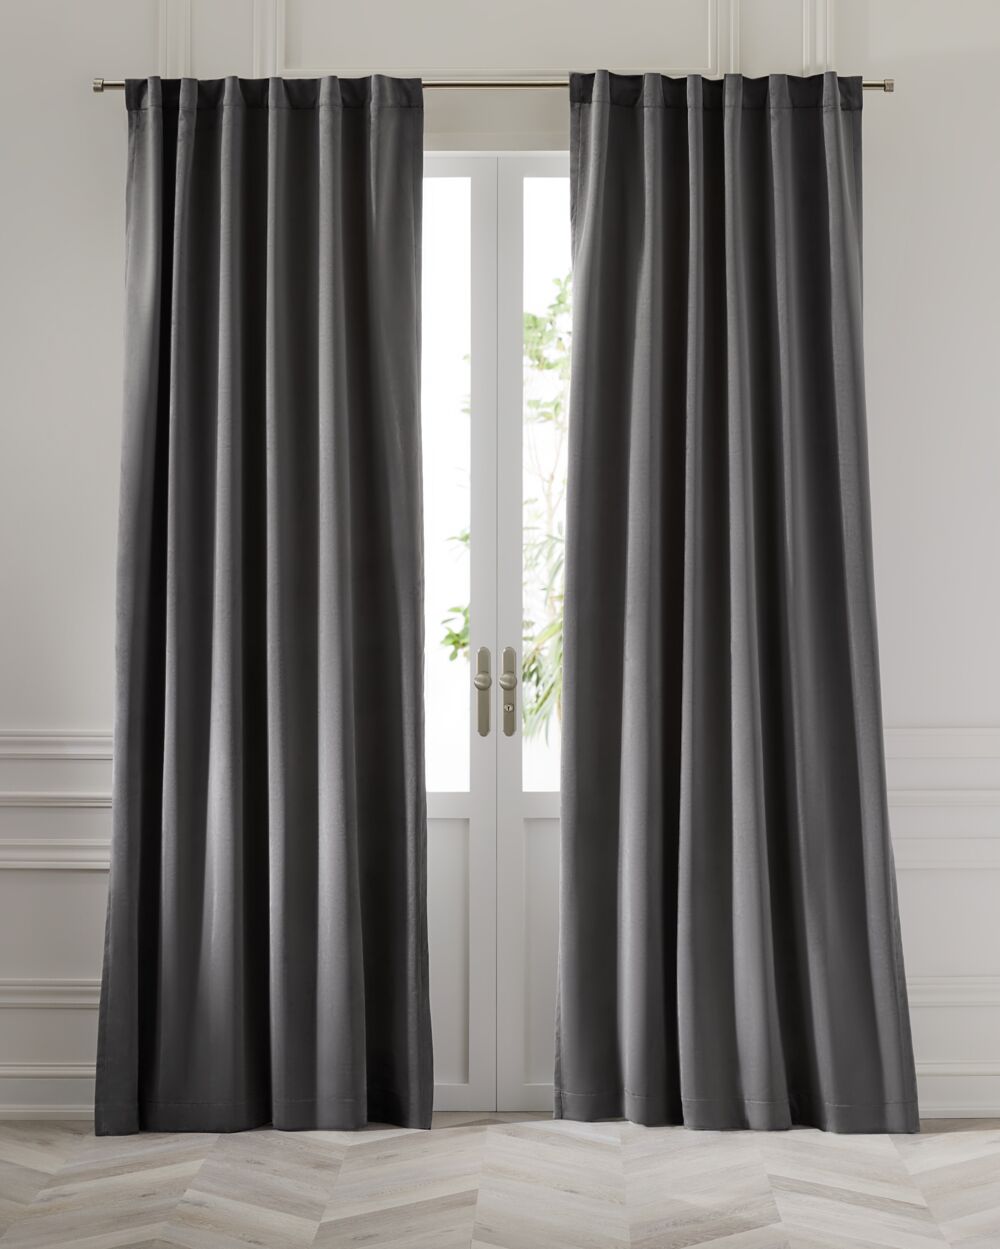 How to Hem Curtains  A Foolproof Method! - The Homes I Have Made